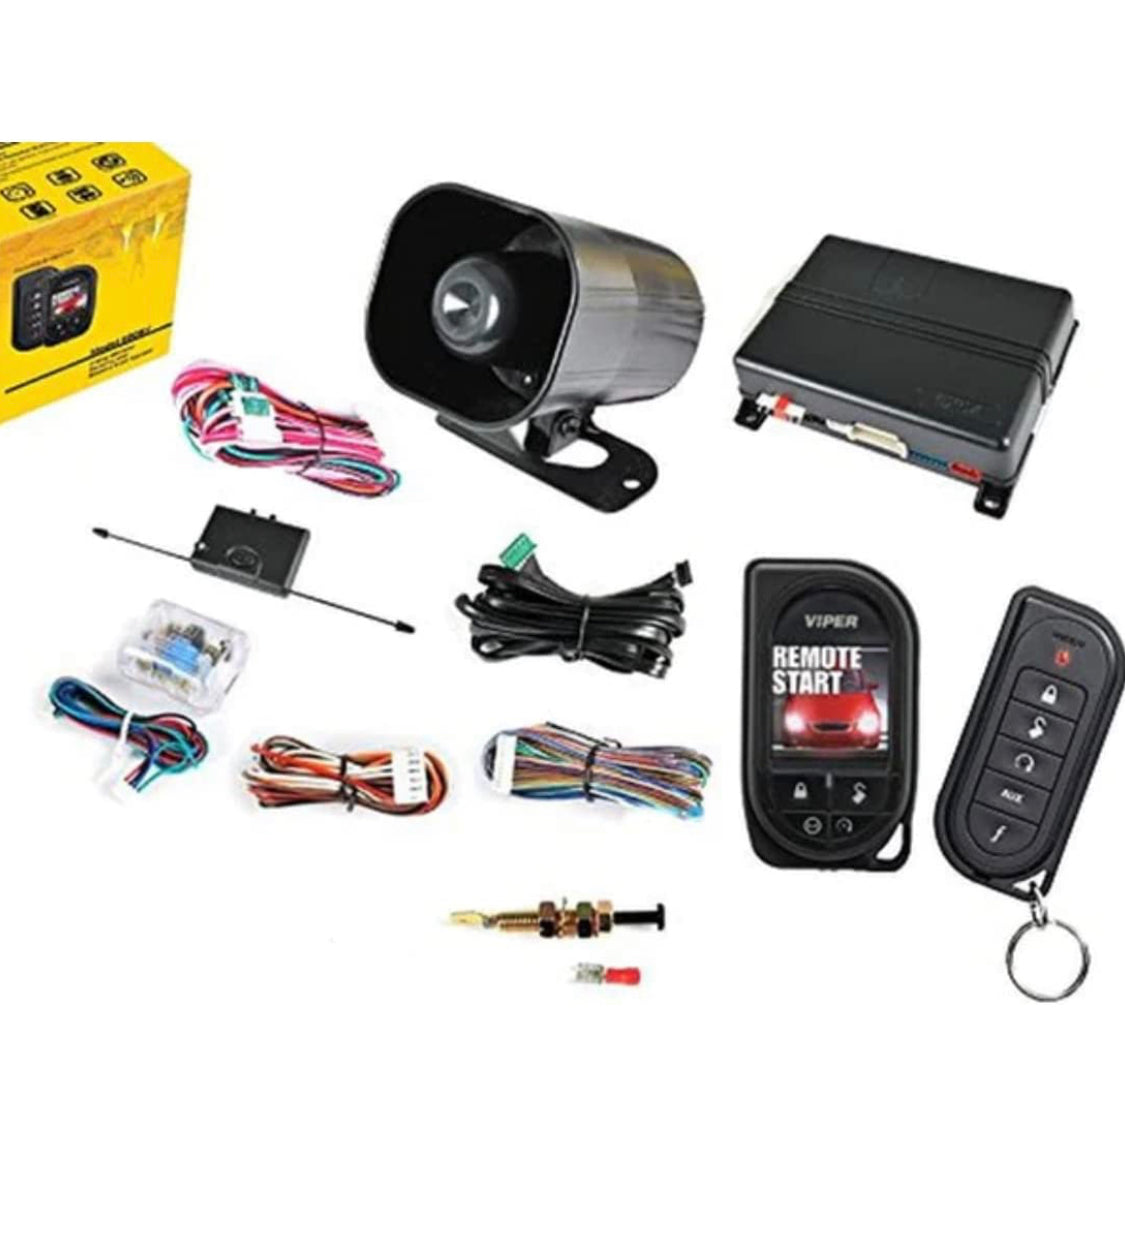 Viper 5906V Color LCD 2-Way Security + Remote Start System Car